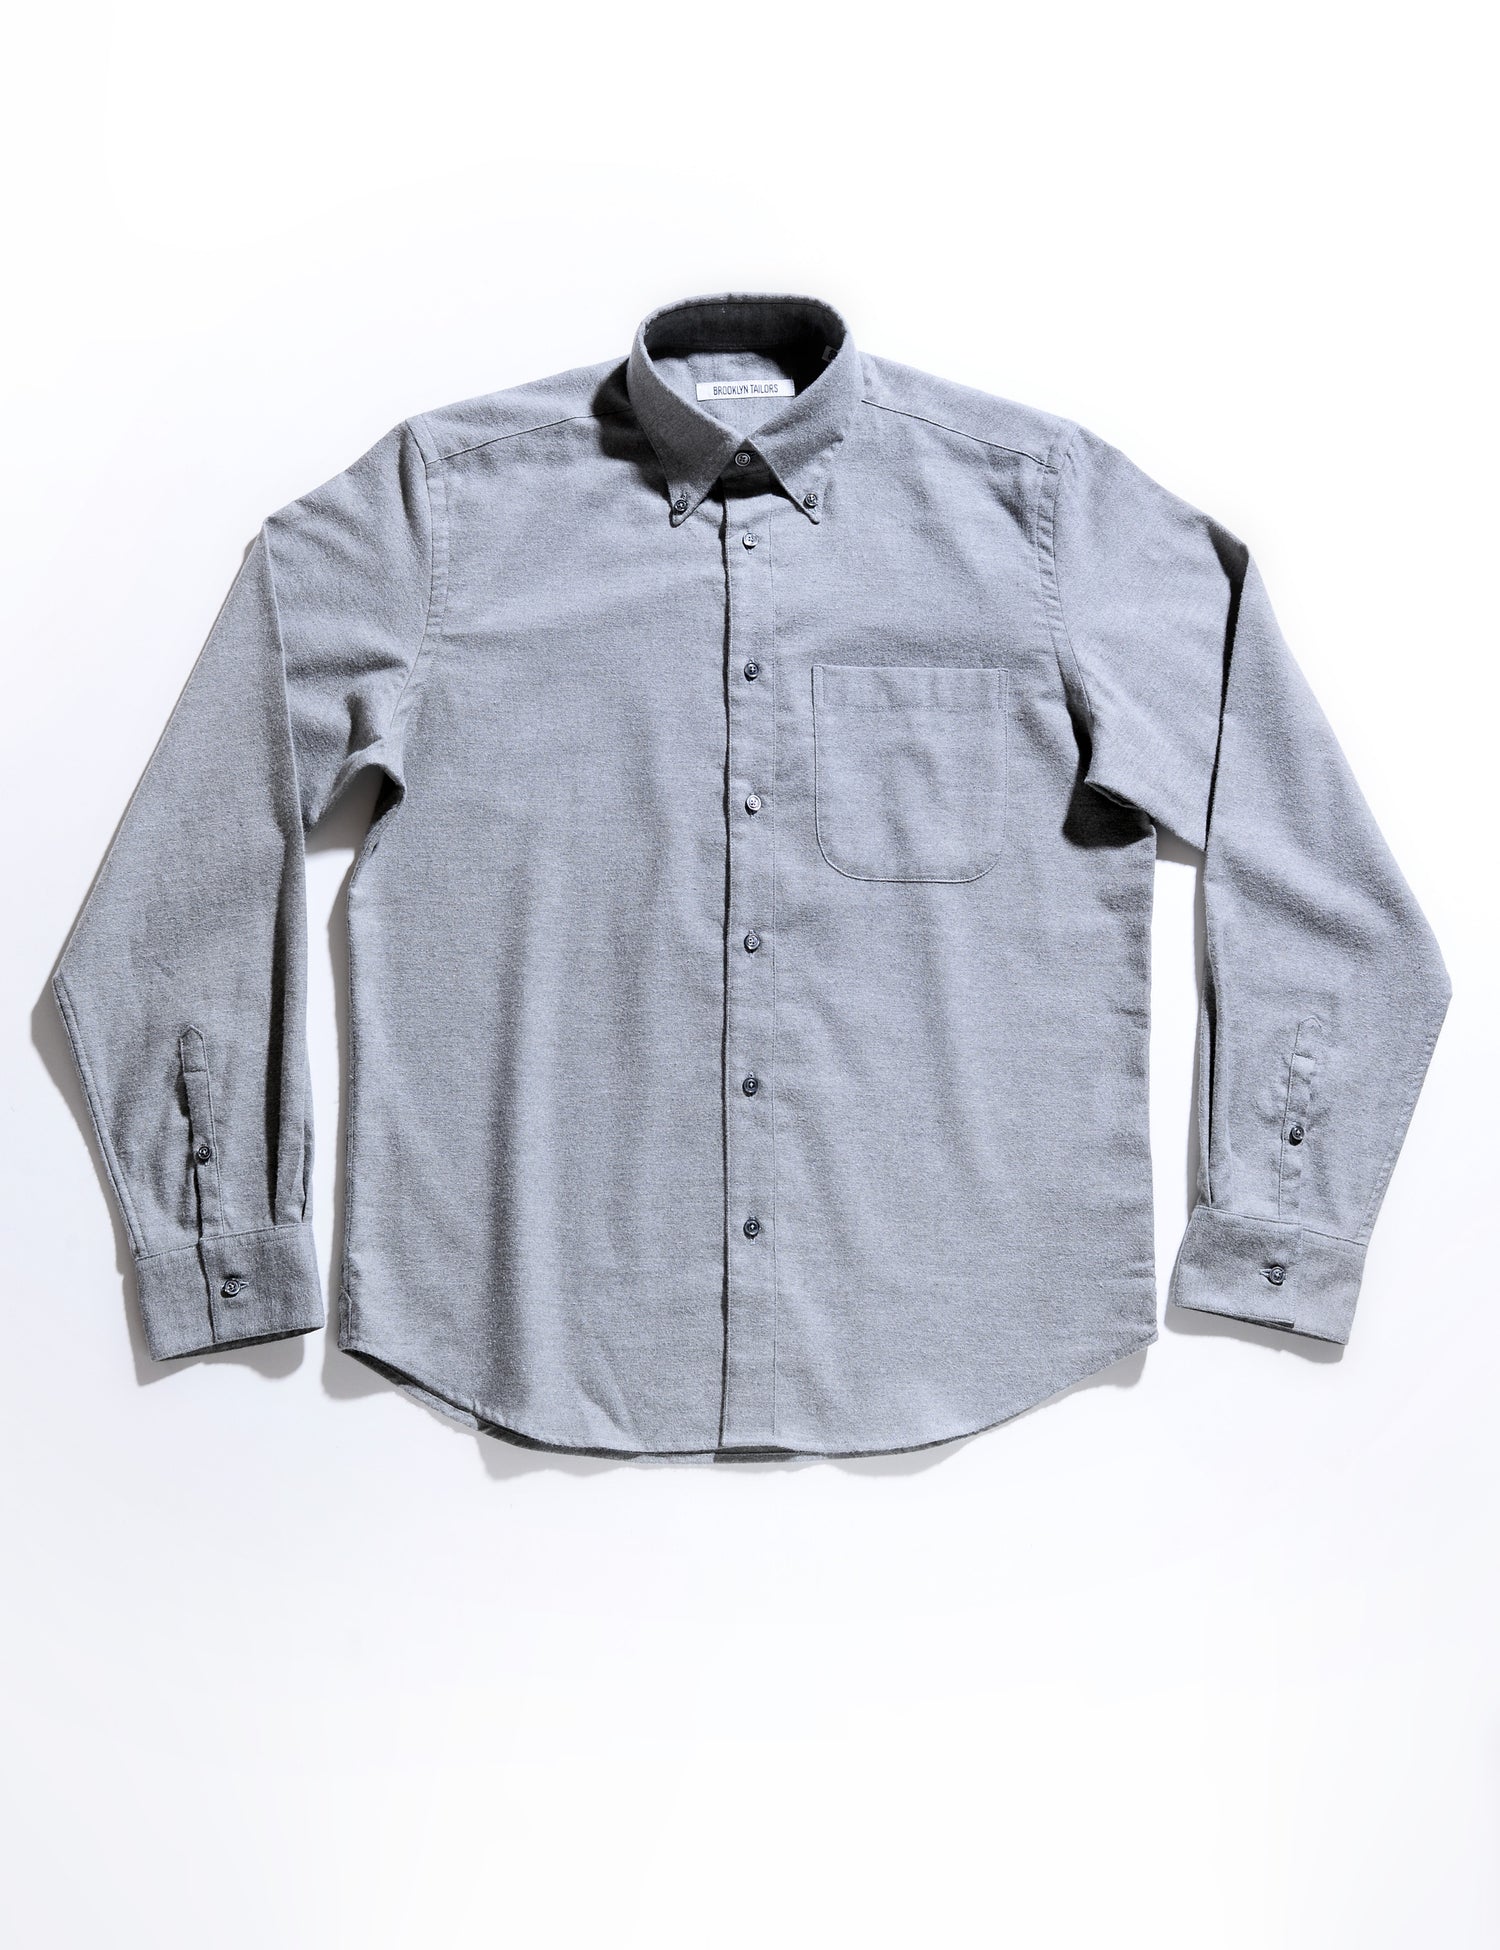 BKT14 Relaxed Shirt in Cotton Cashmere Flannel - Dove Gray